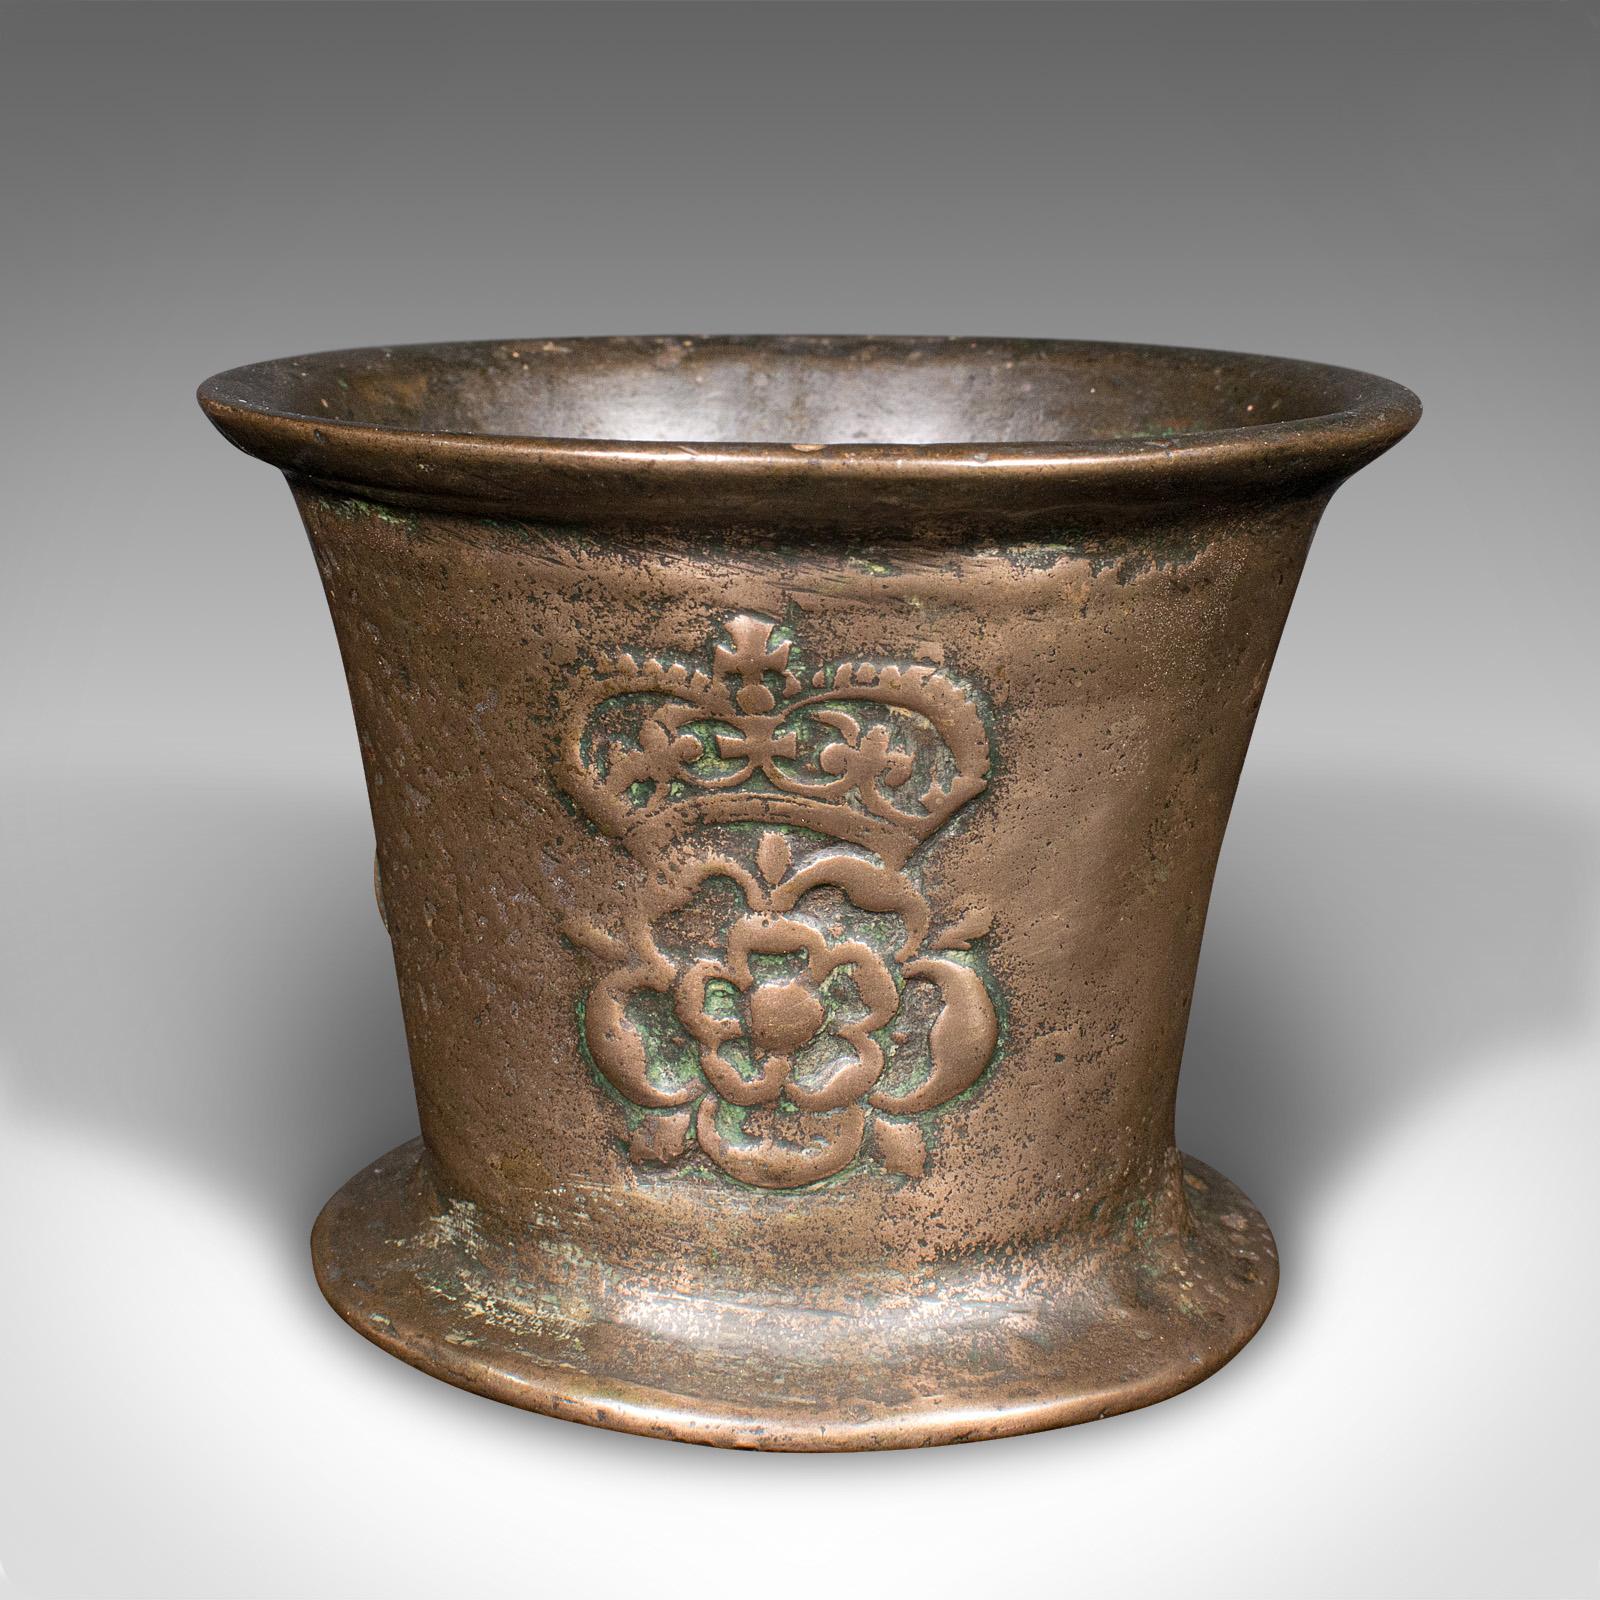 Antique Tudor Rose Mortar And Pestle, English, Bronze, Apothecary, 17th Century In Good Condition For Sale In Hele, Devon, GB